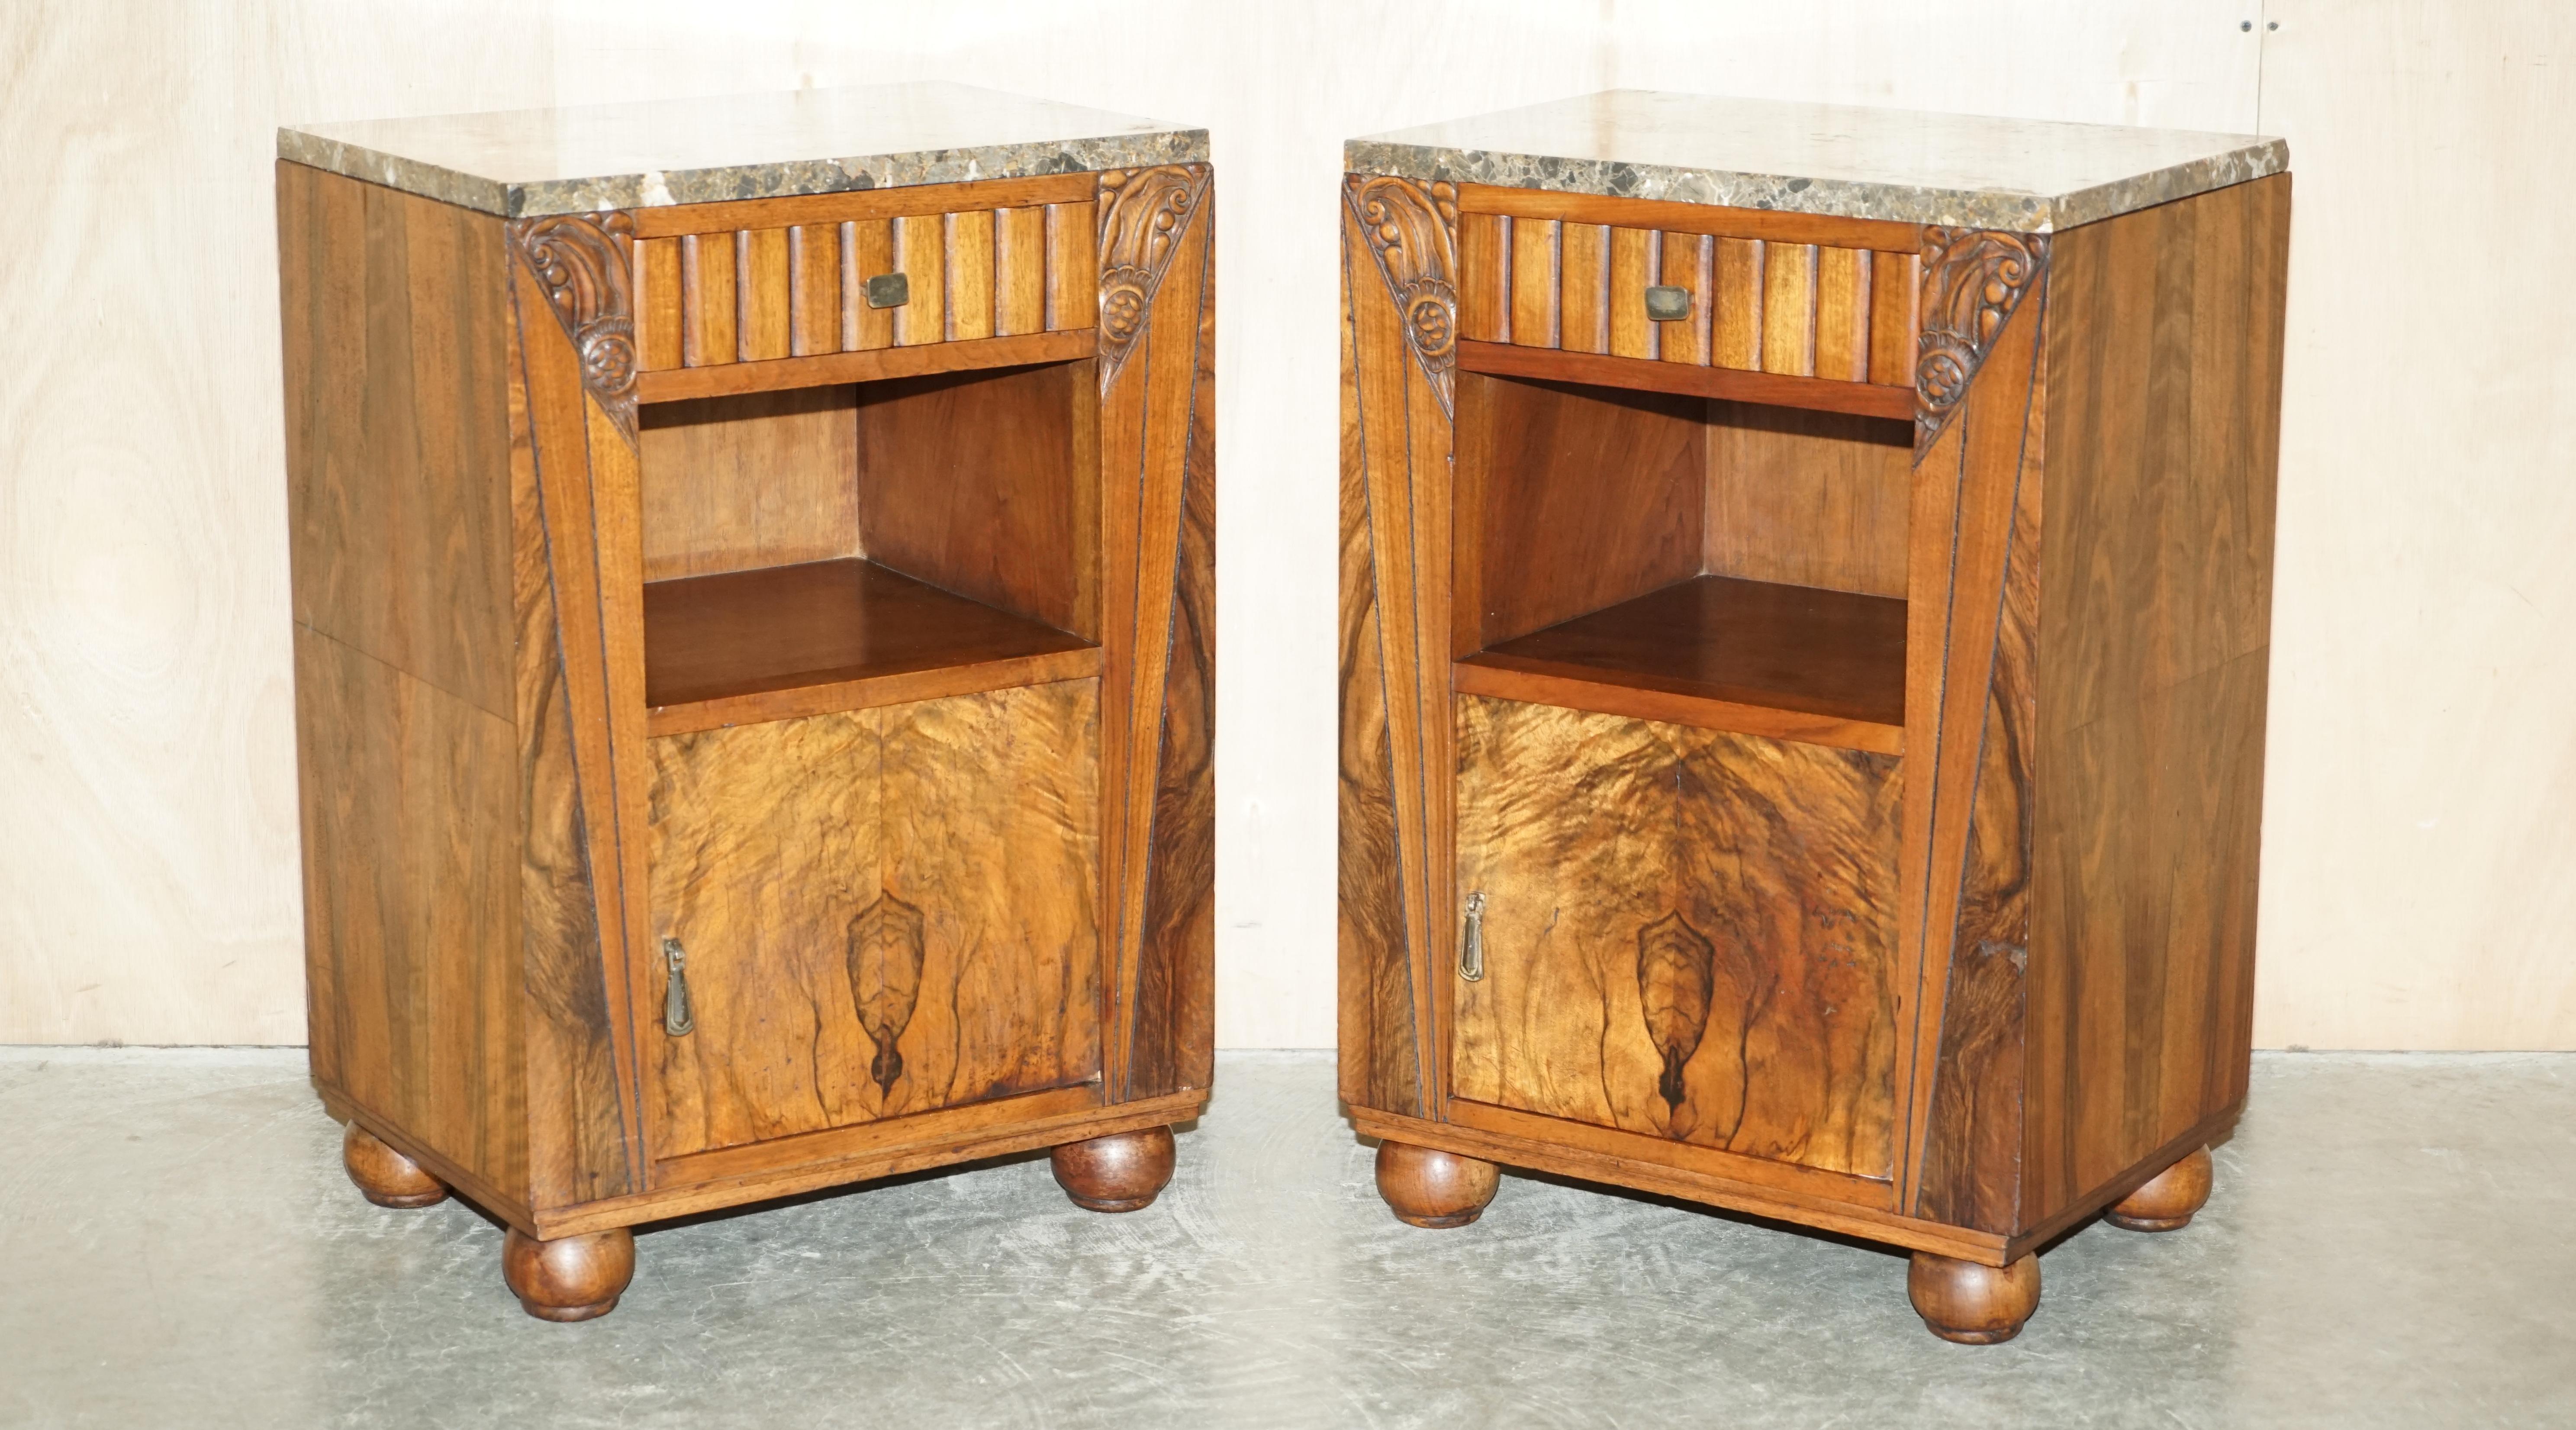 We are delighted to offer for sale this sublime pair of original Art Deco circa 1920 Rosewood & Marble Bedside, Side End tables 

A truly stunning and well made pair, they are as Art Deco as they come, beautifully sculpted frames in Brazilian